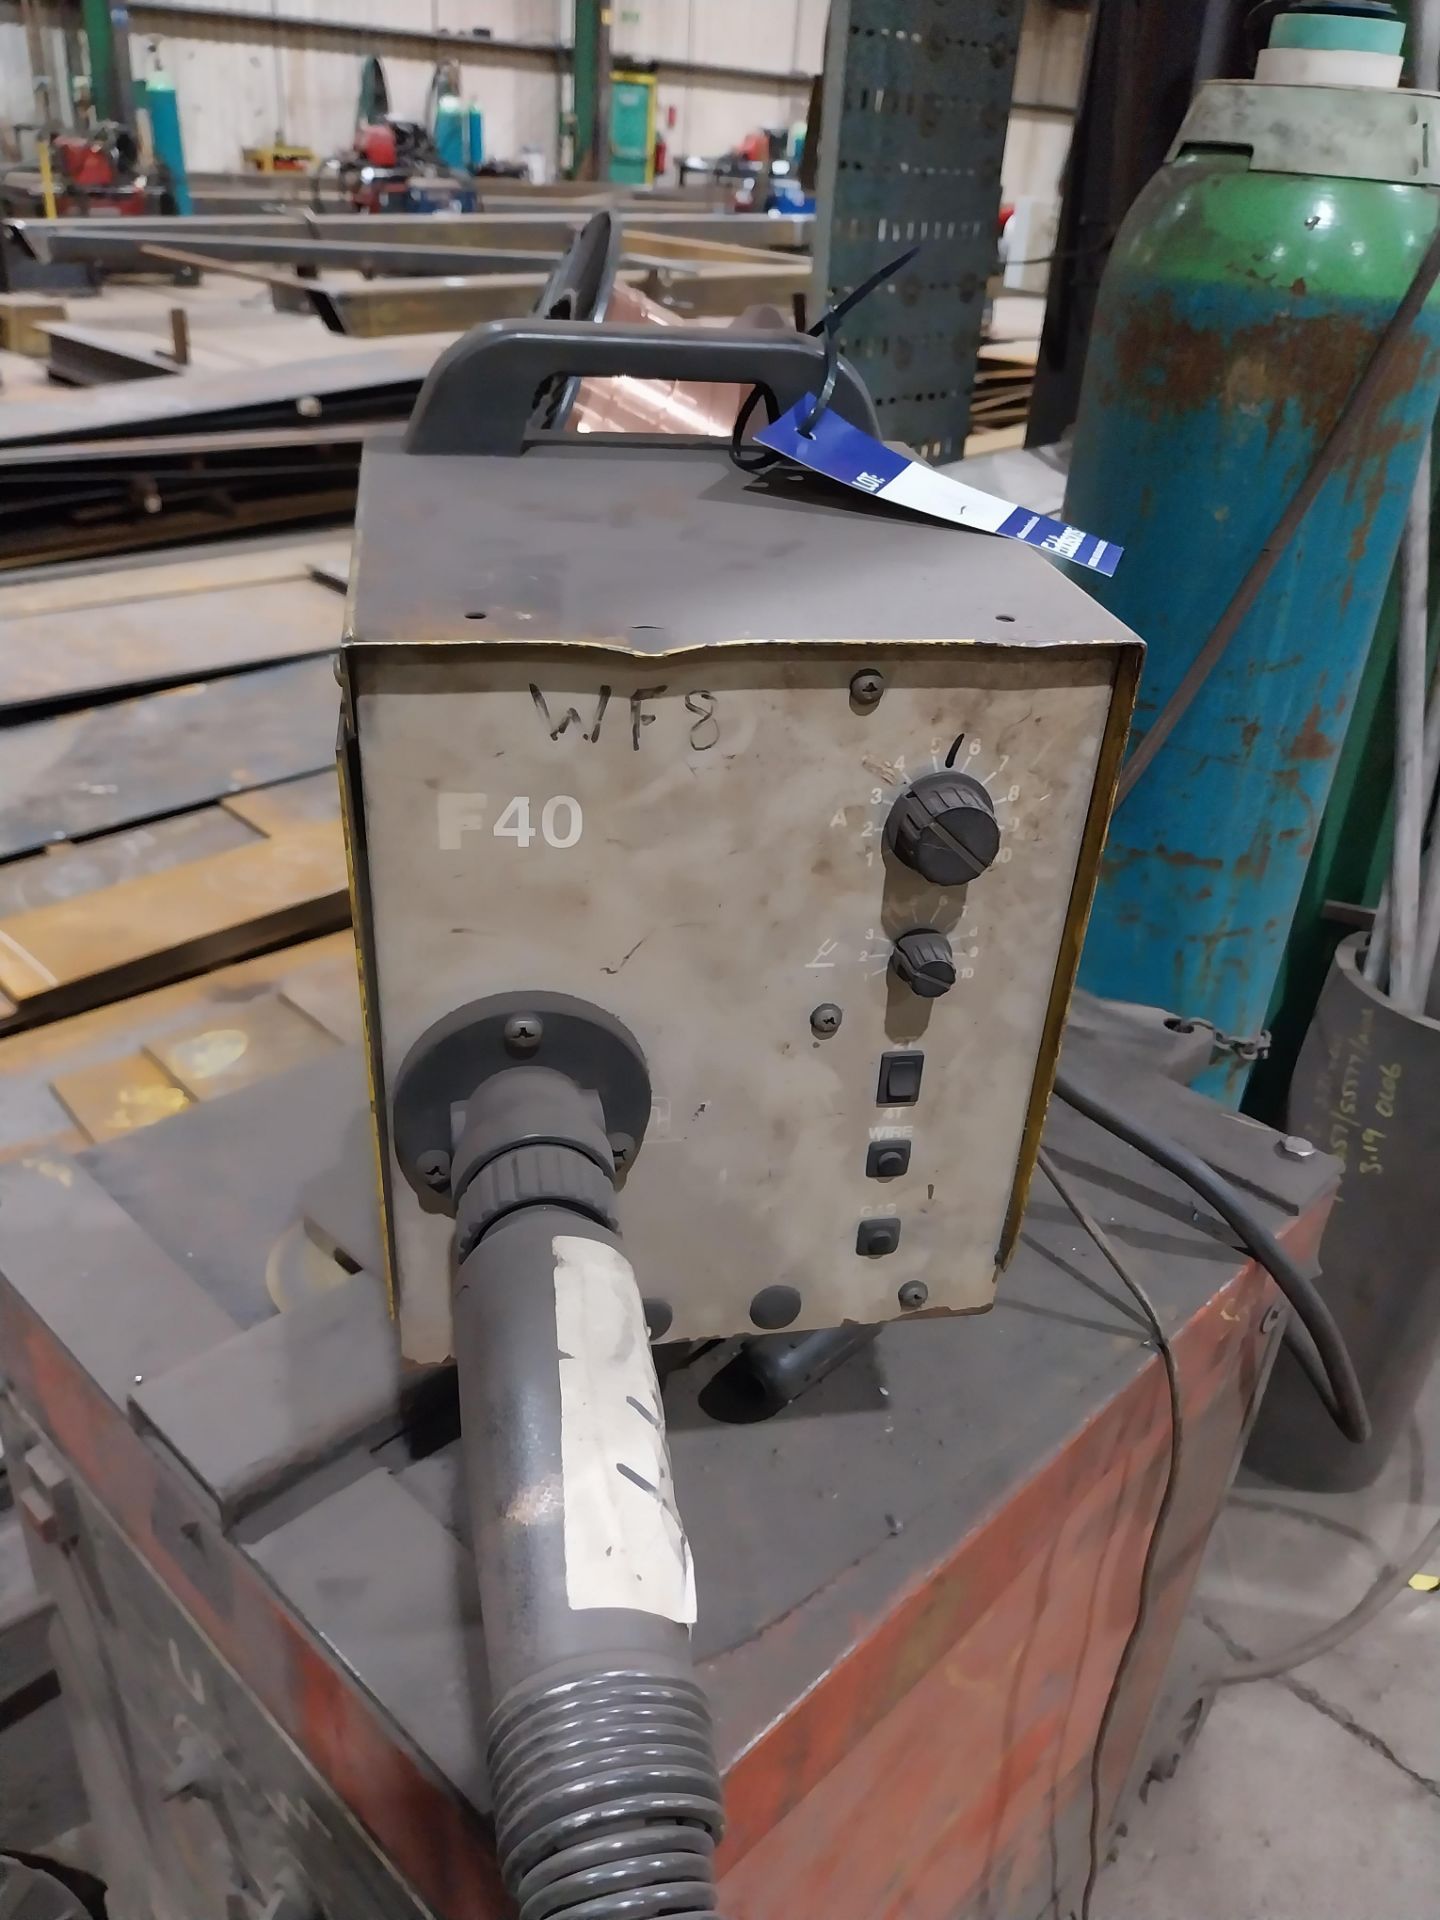 Kempp RA450 mig welder with F40 wire feed, torch and clamp (bottle not included) - Image 4 of 4